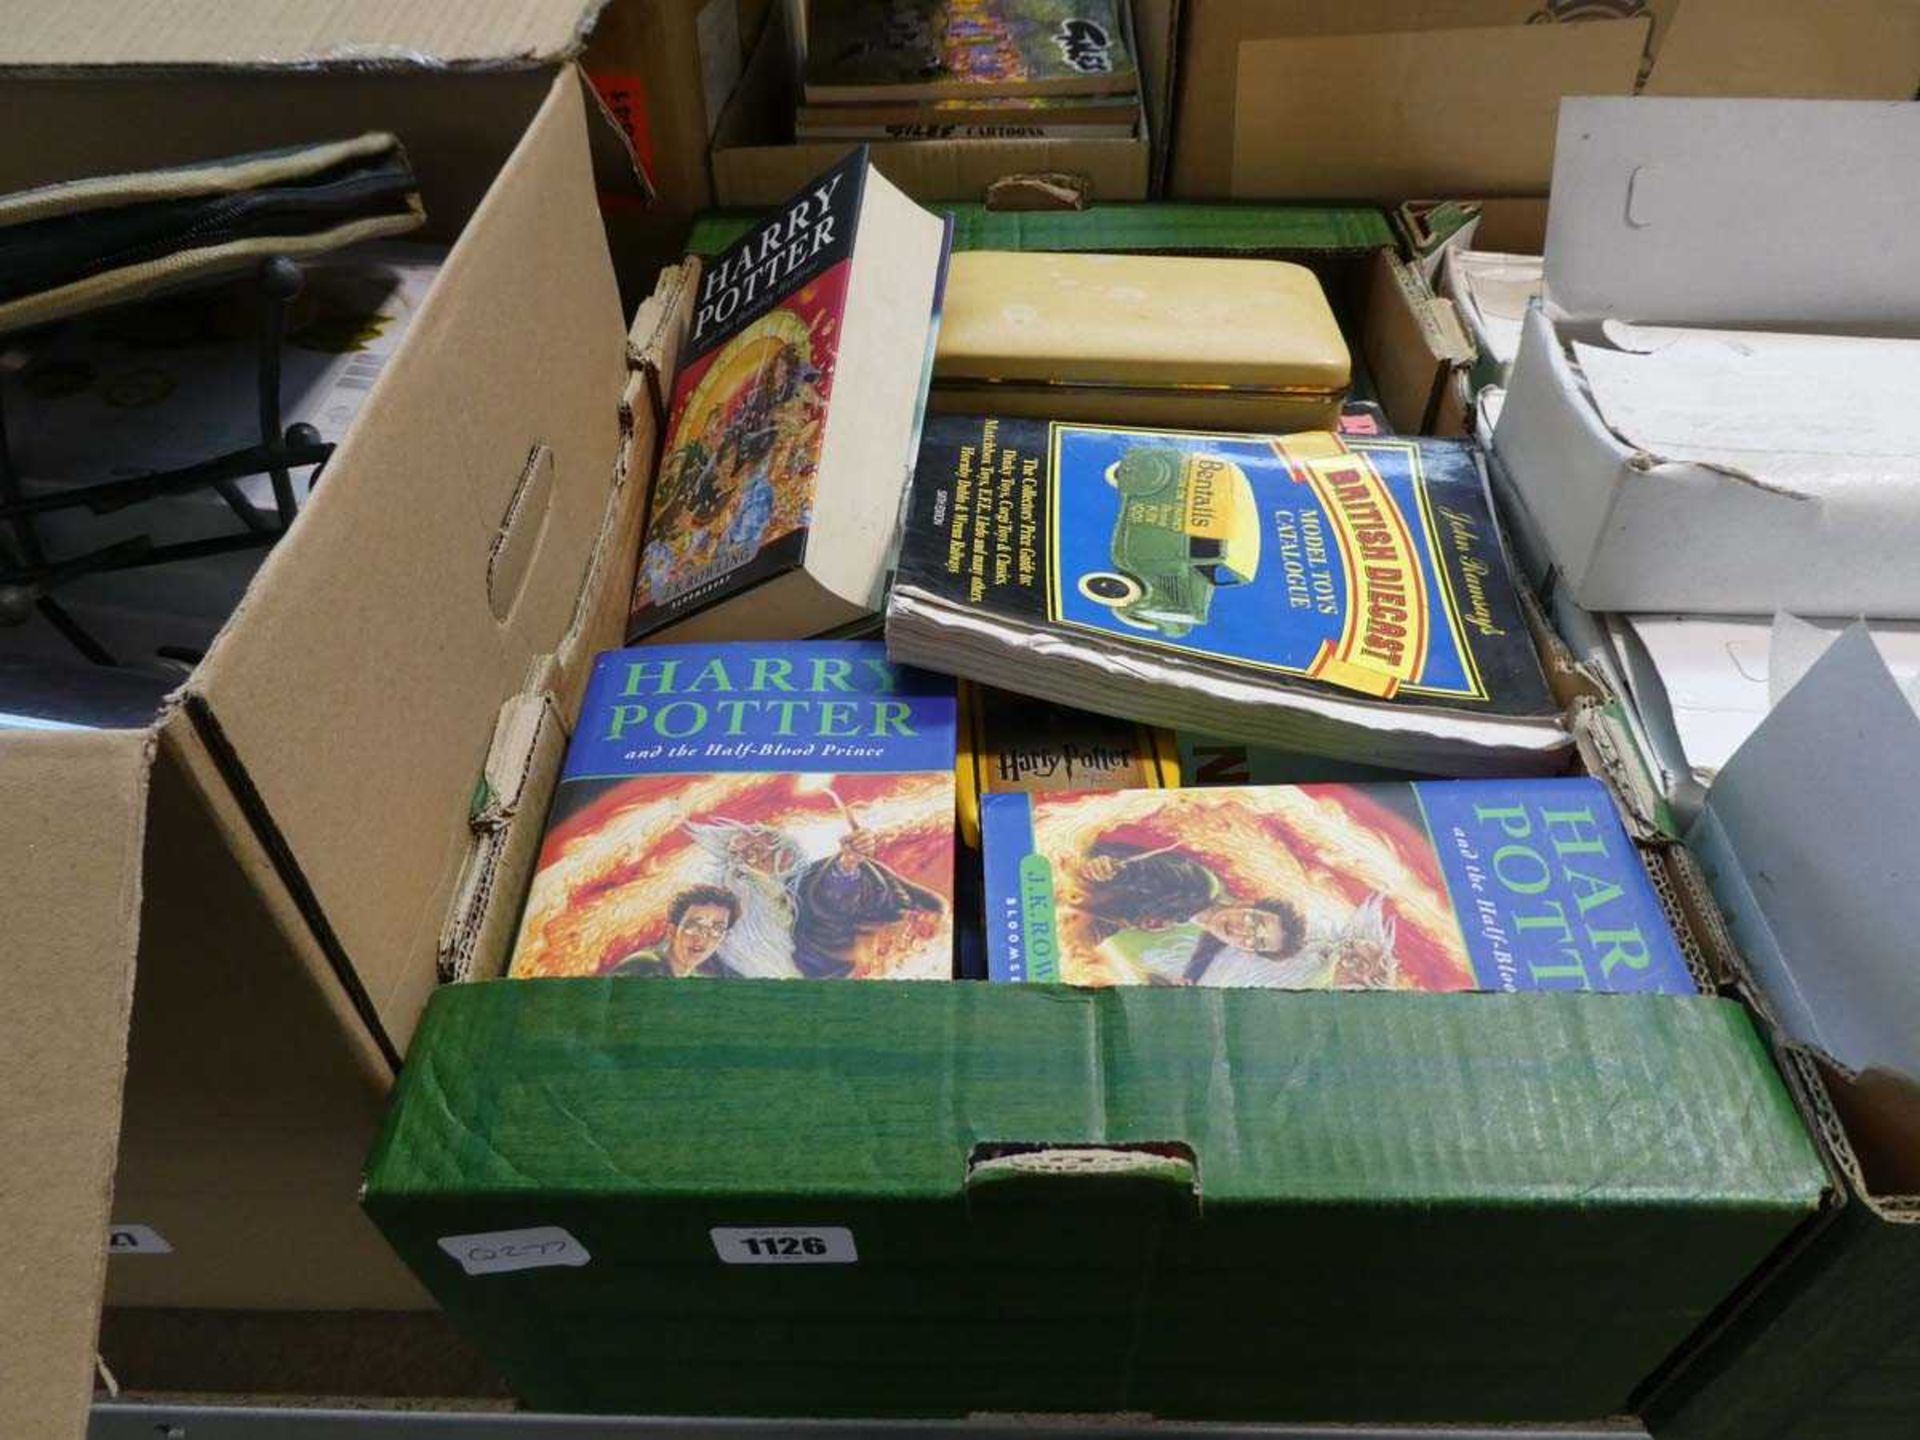 Crate containing books incl. Harry Potter, record collector's price guide, etc.